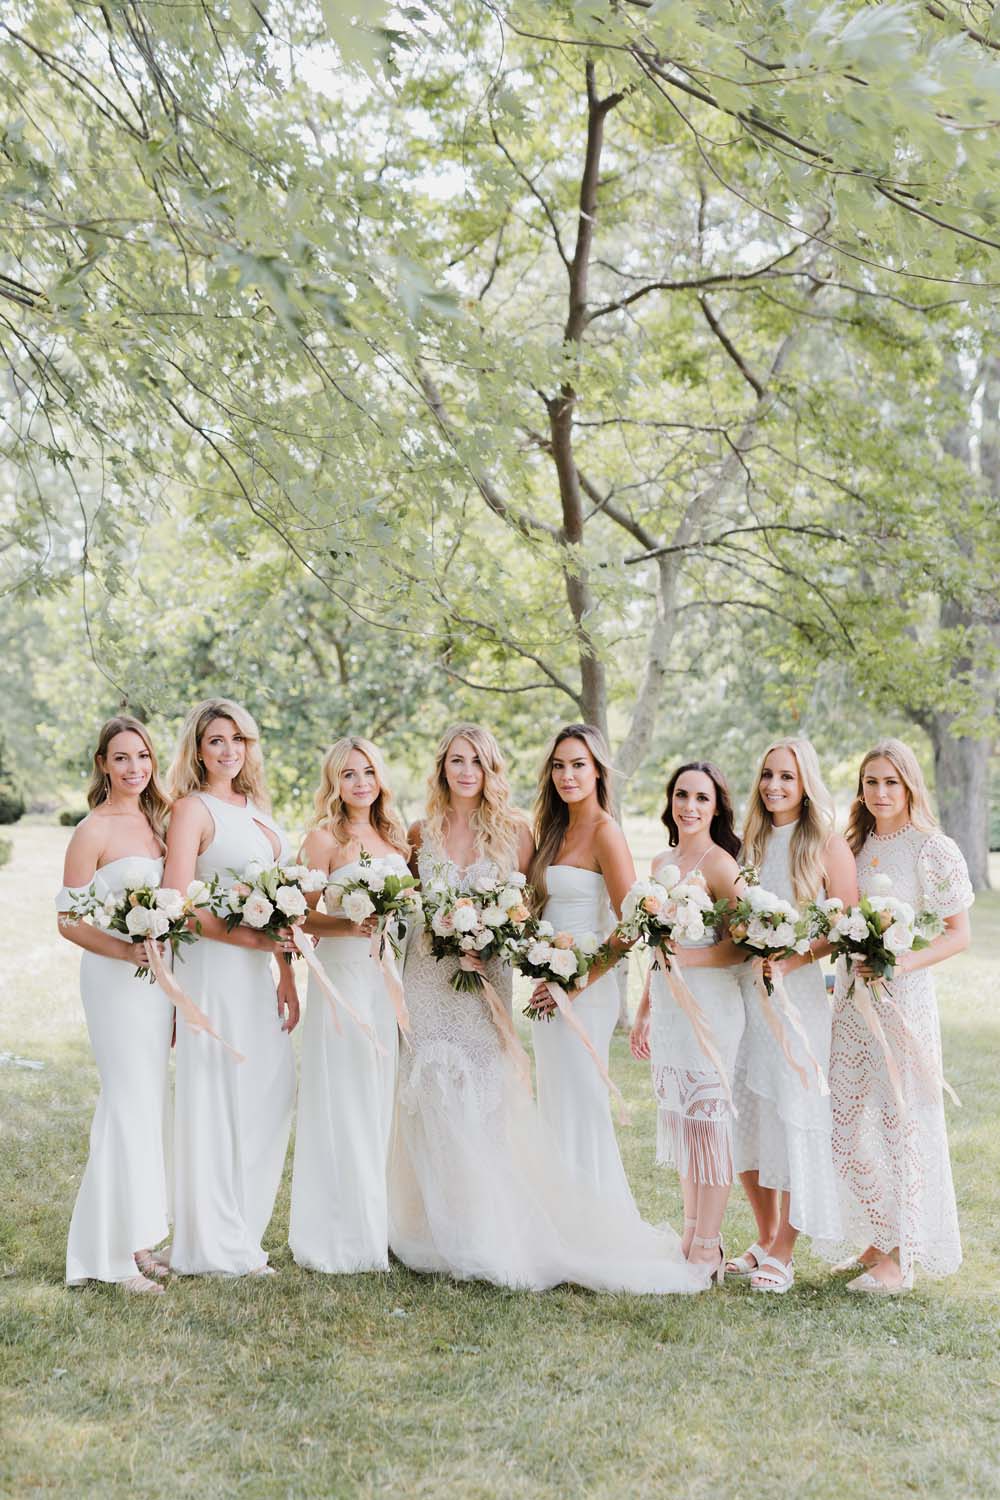 A Whimsical Wedding at Windmill Point, Ontario - Bridal Party